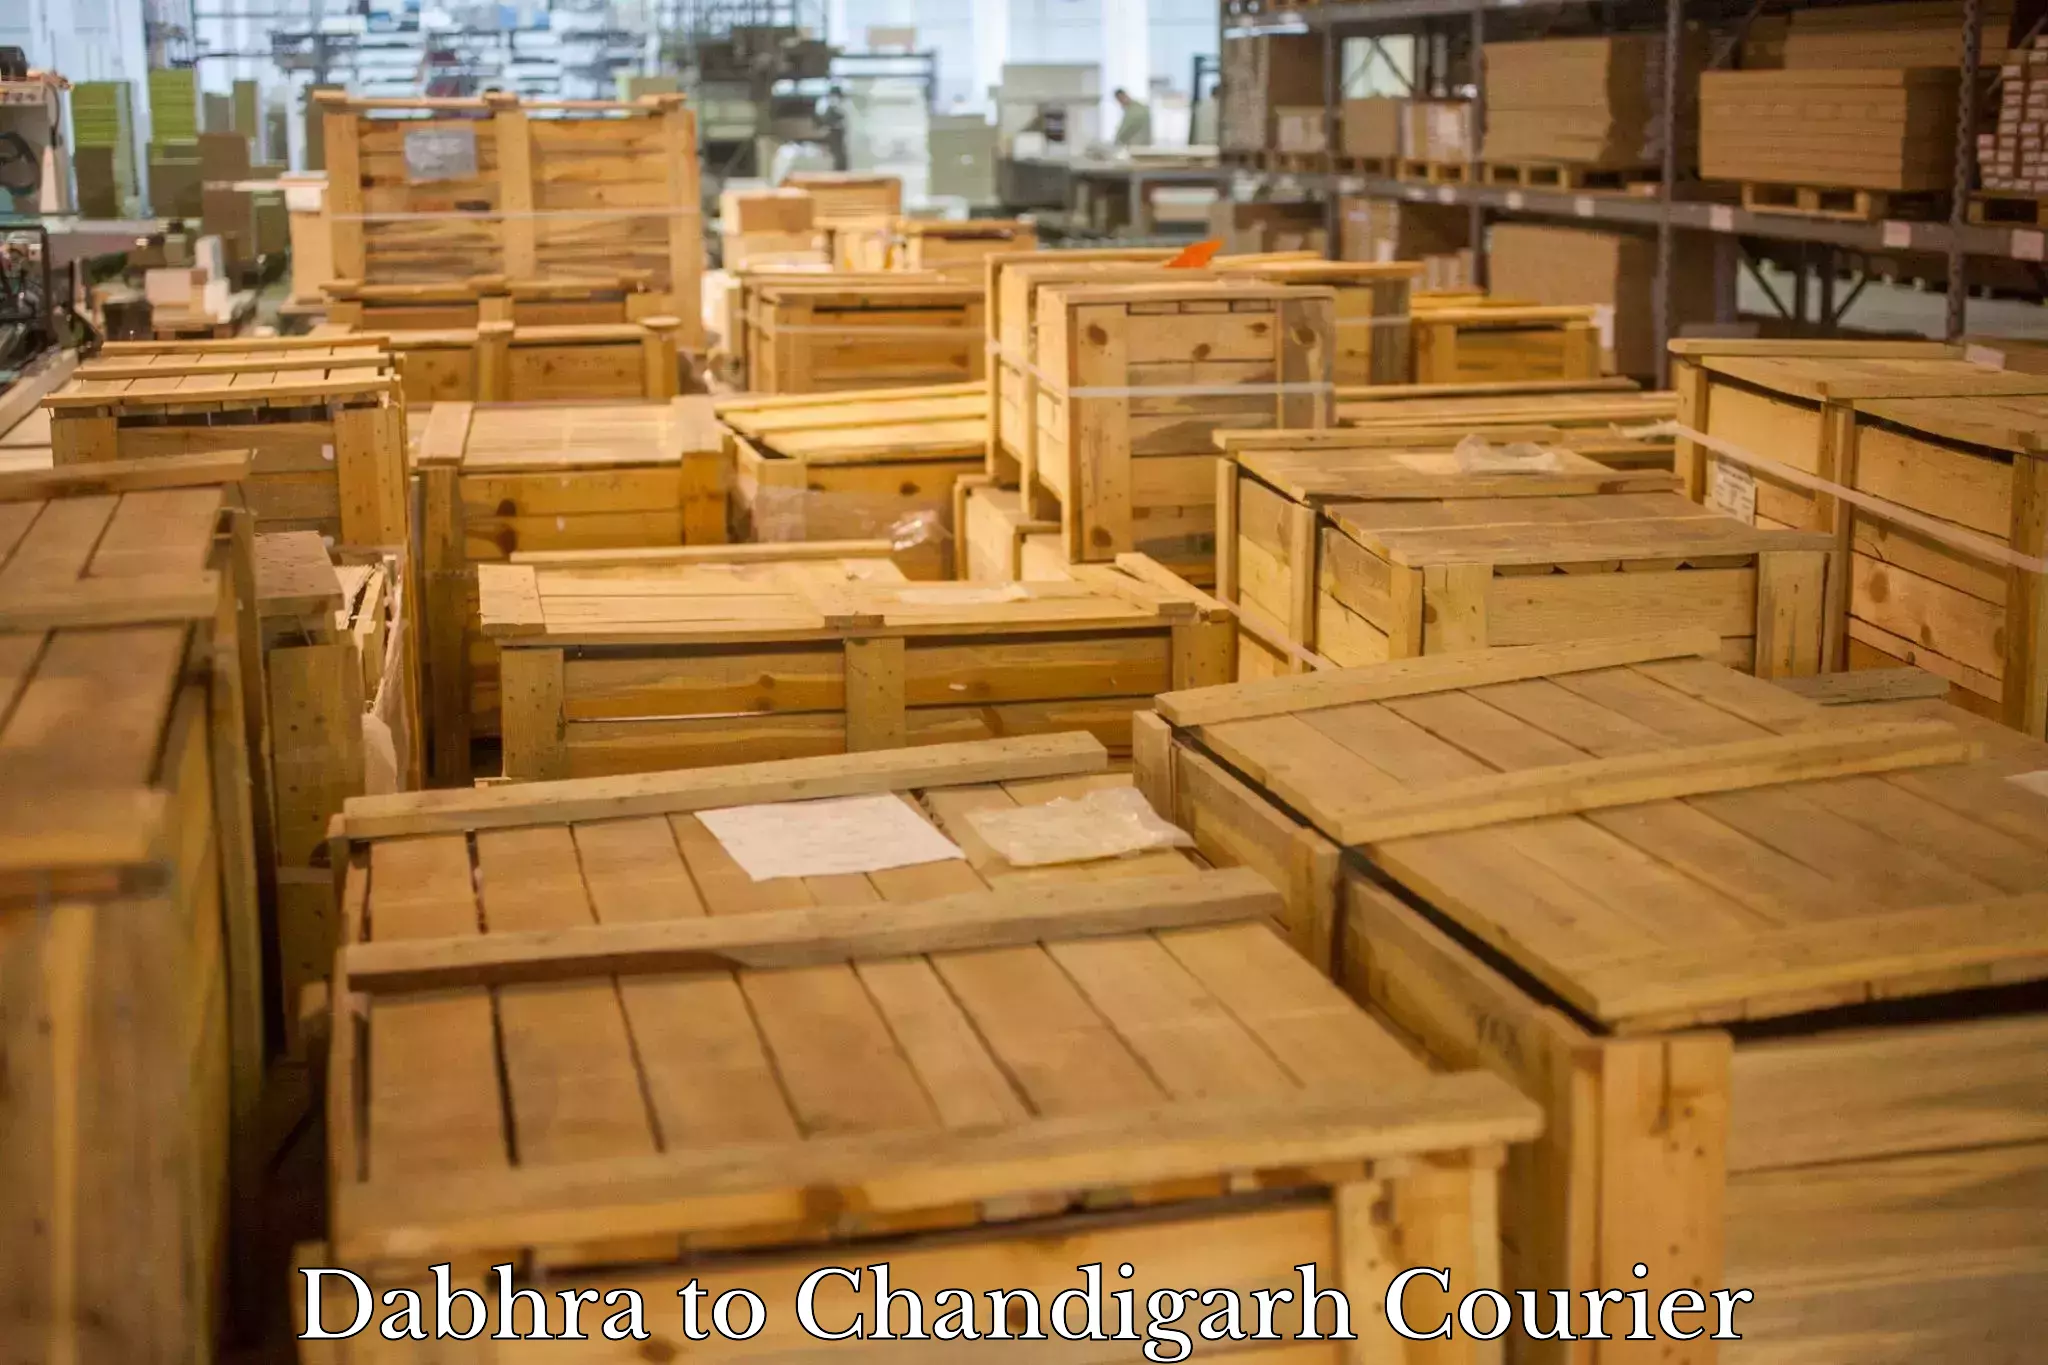 Seamless shipping experience in Dabhra to Chandigarh